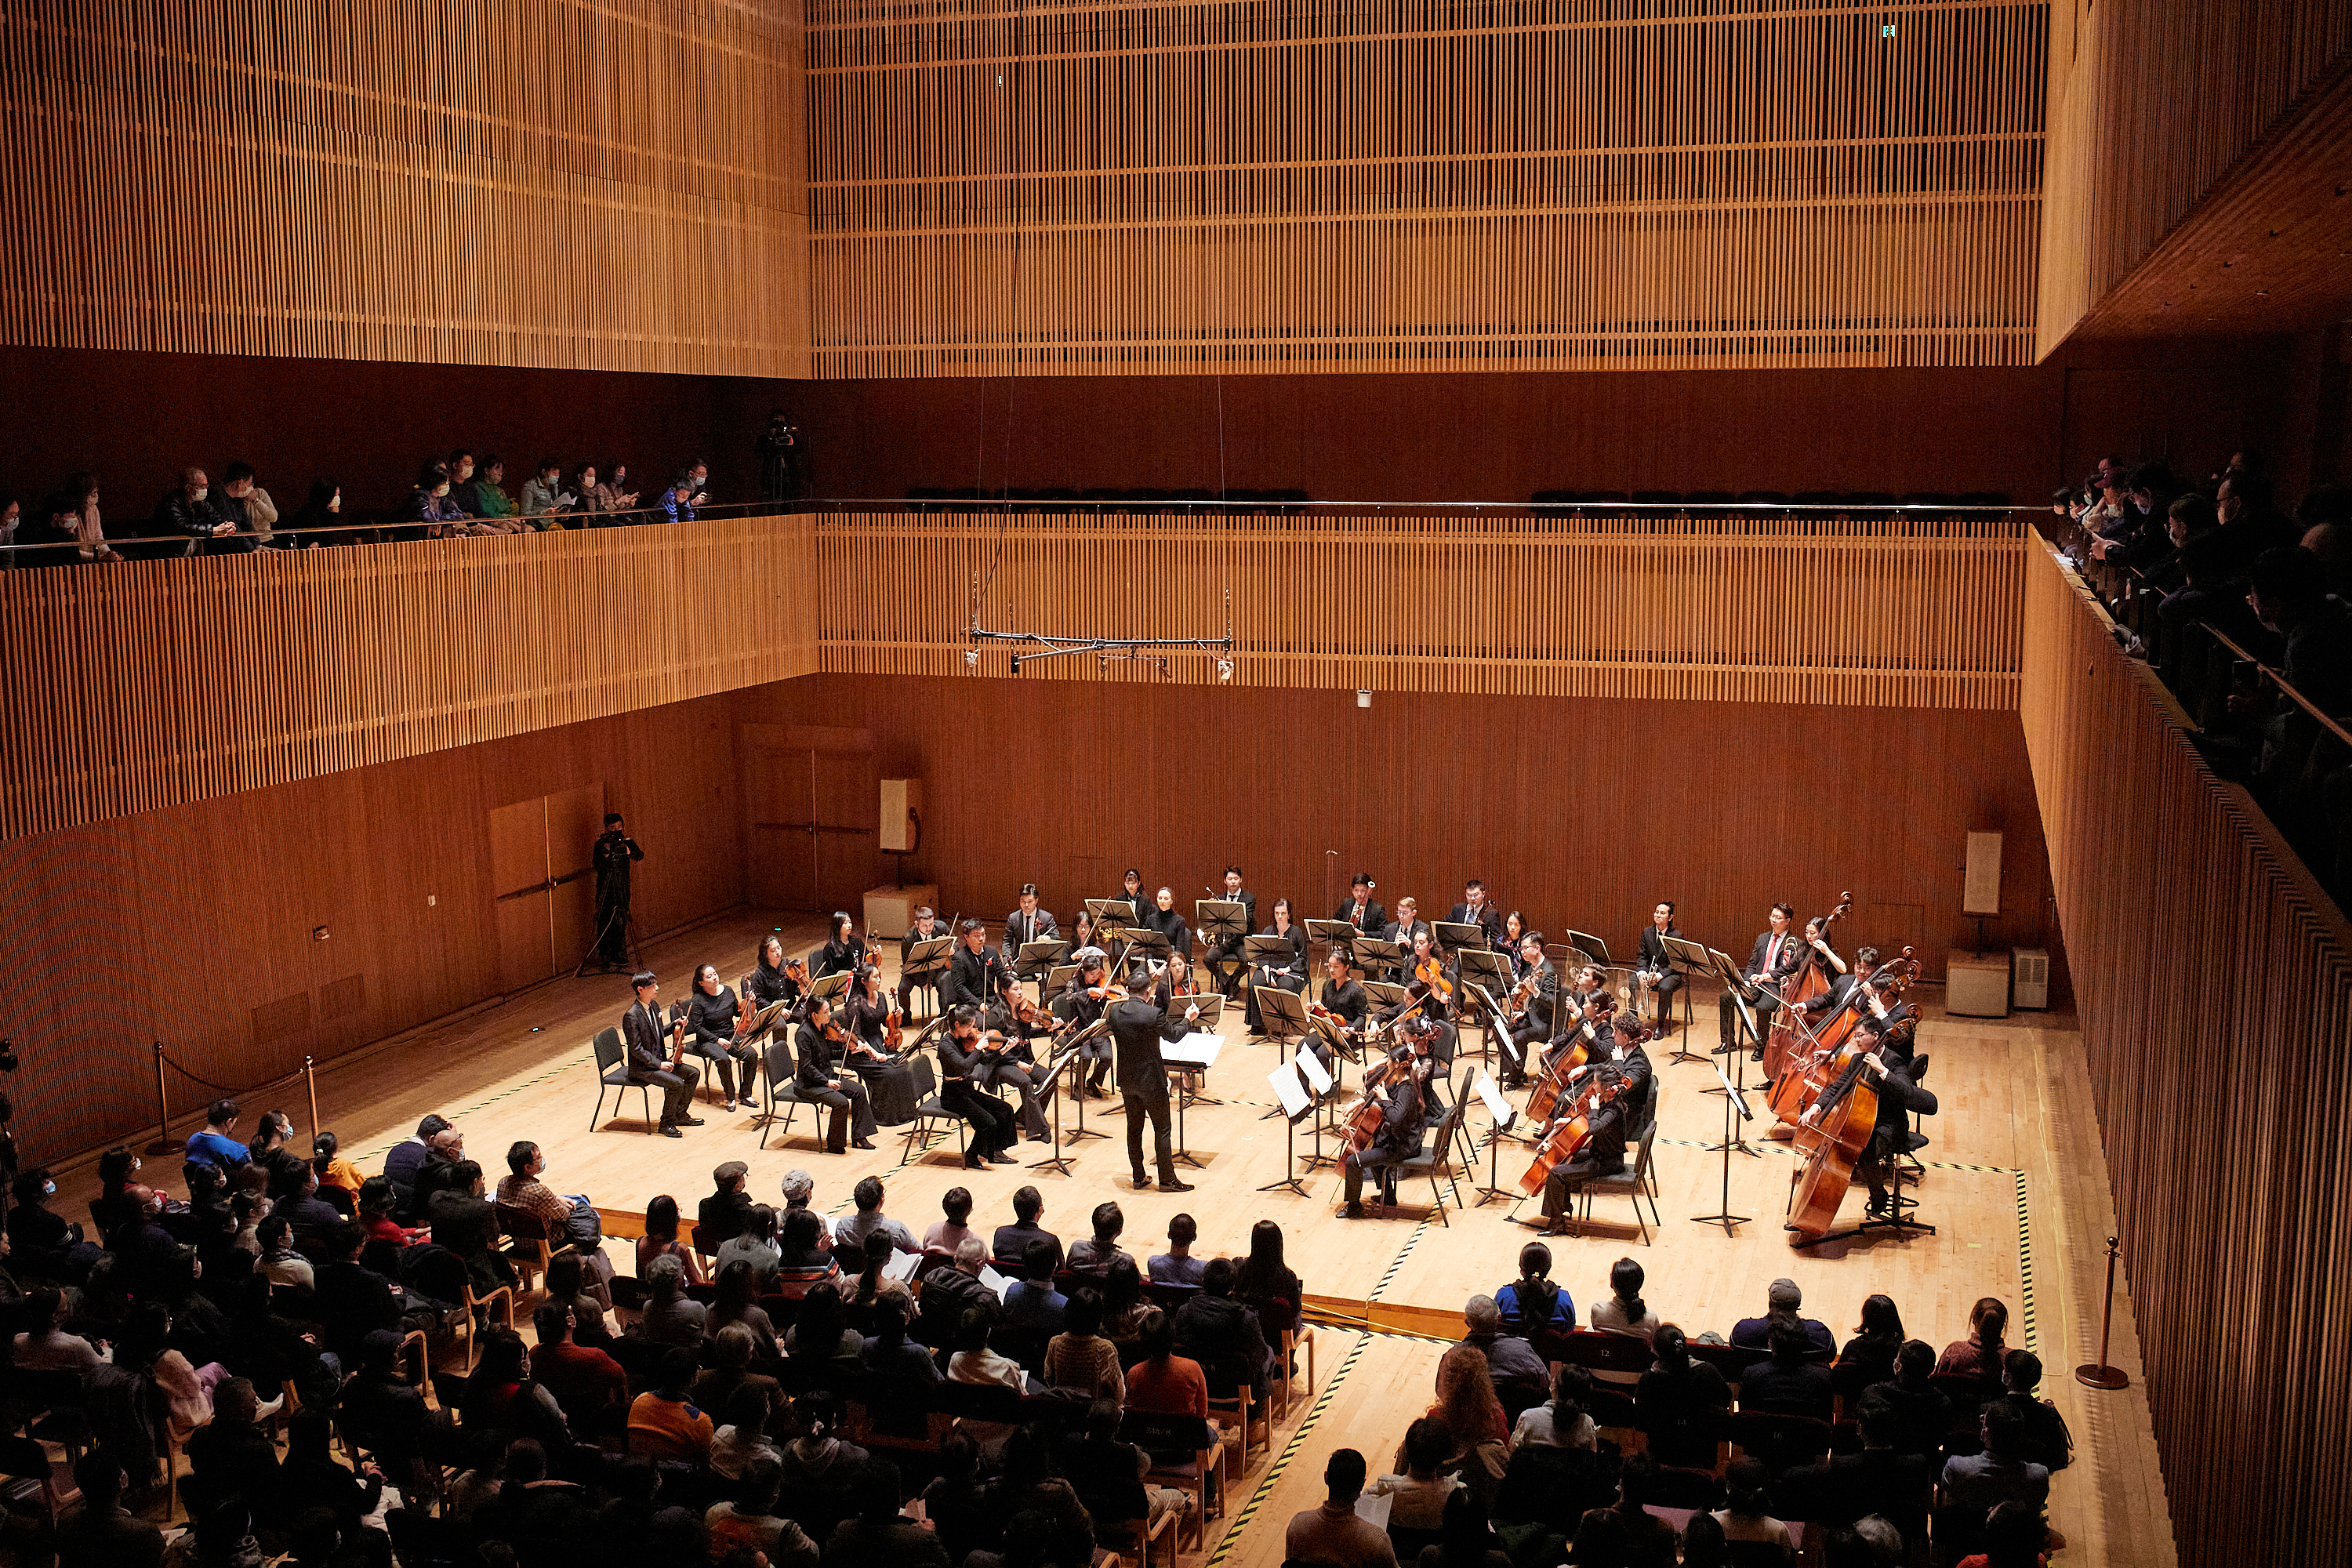 Zhang Lu conducted the student orchestra in Stravinsky's Pulcinella Suite at the Shanghai Symphony Orchestra Concert Hall.